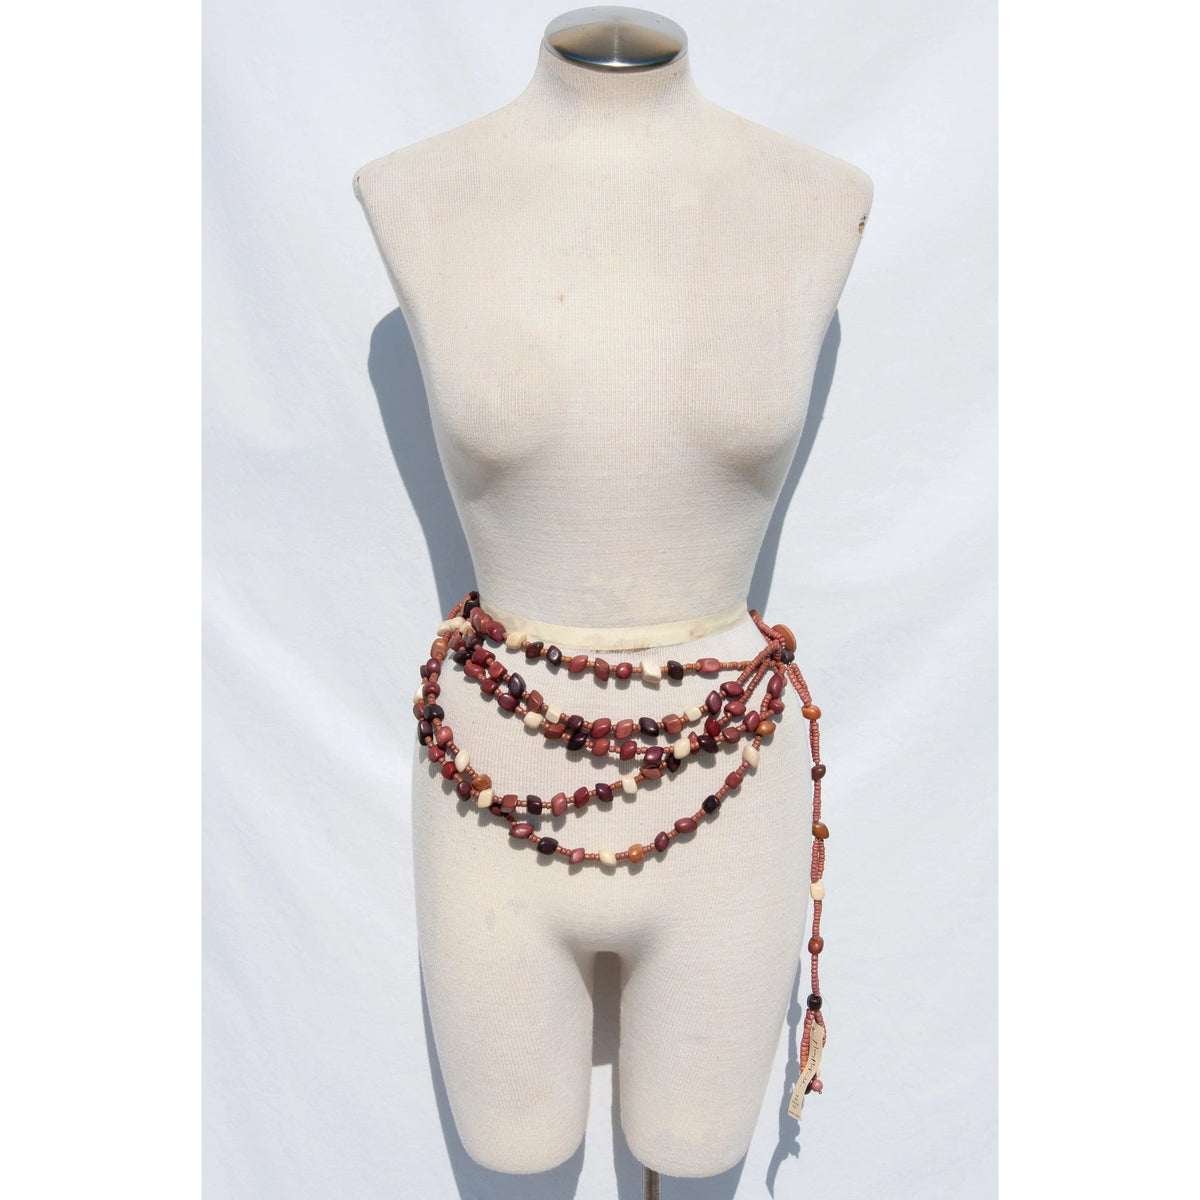 MARY MCFADDEN Deadstock Vintage Wooden Waist Belt or Necklace - theREMODA